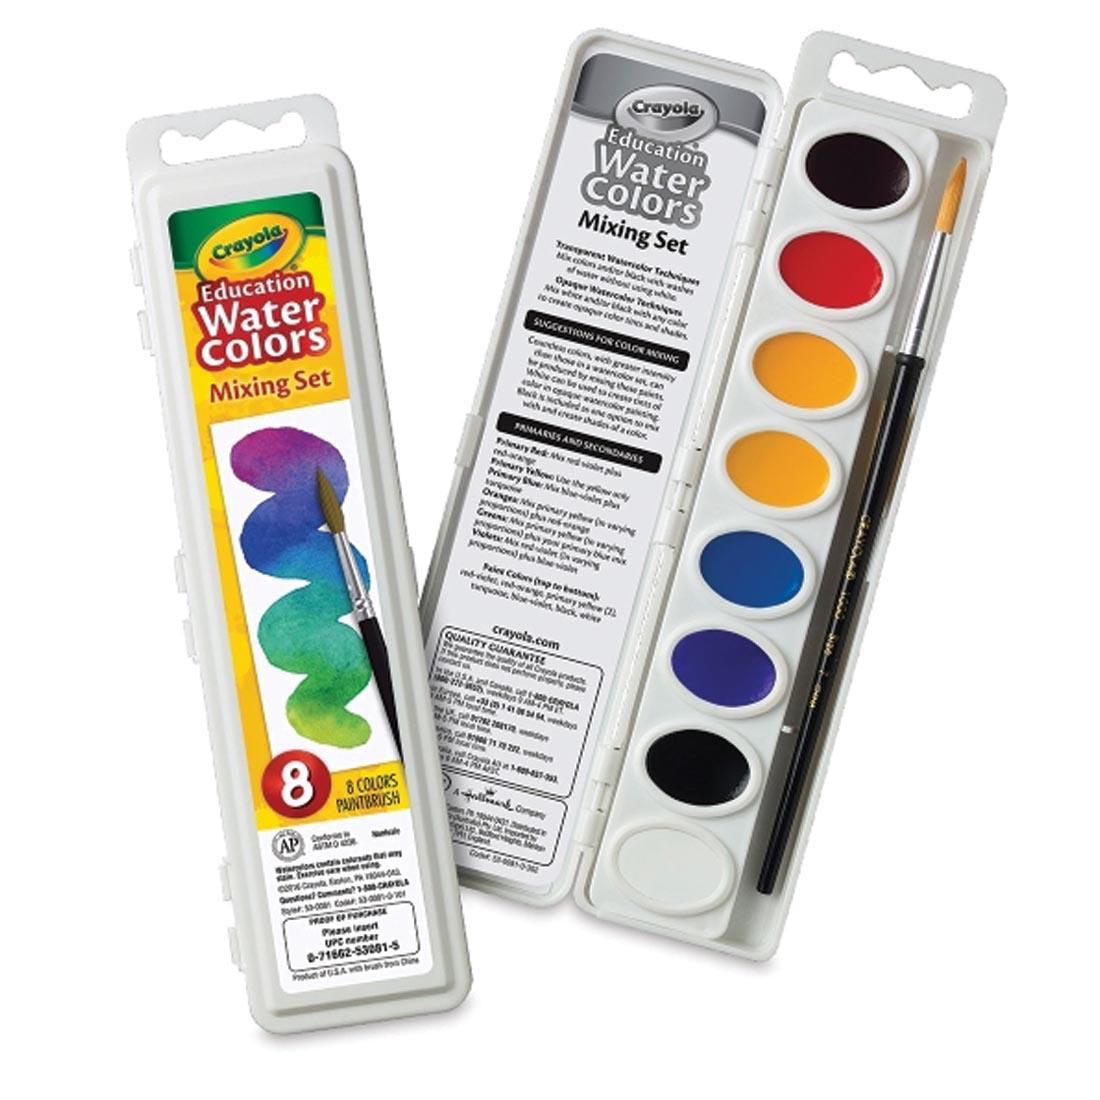 Crayola Watercolors Mixing Set package shown both open and closed